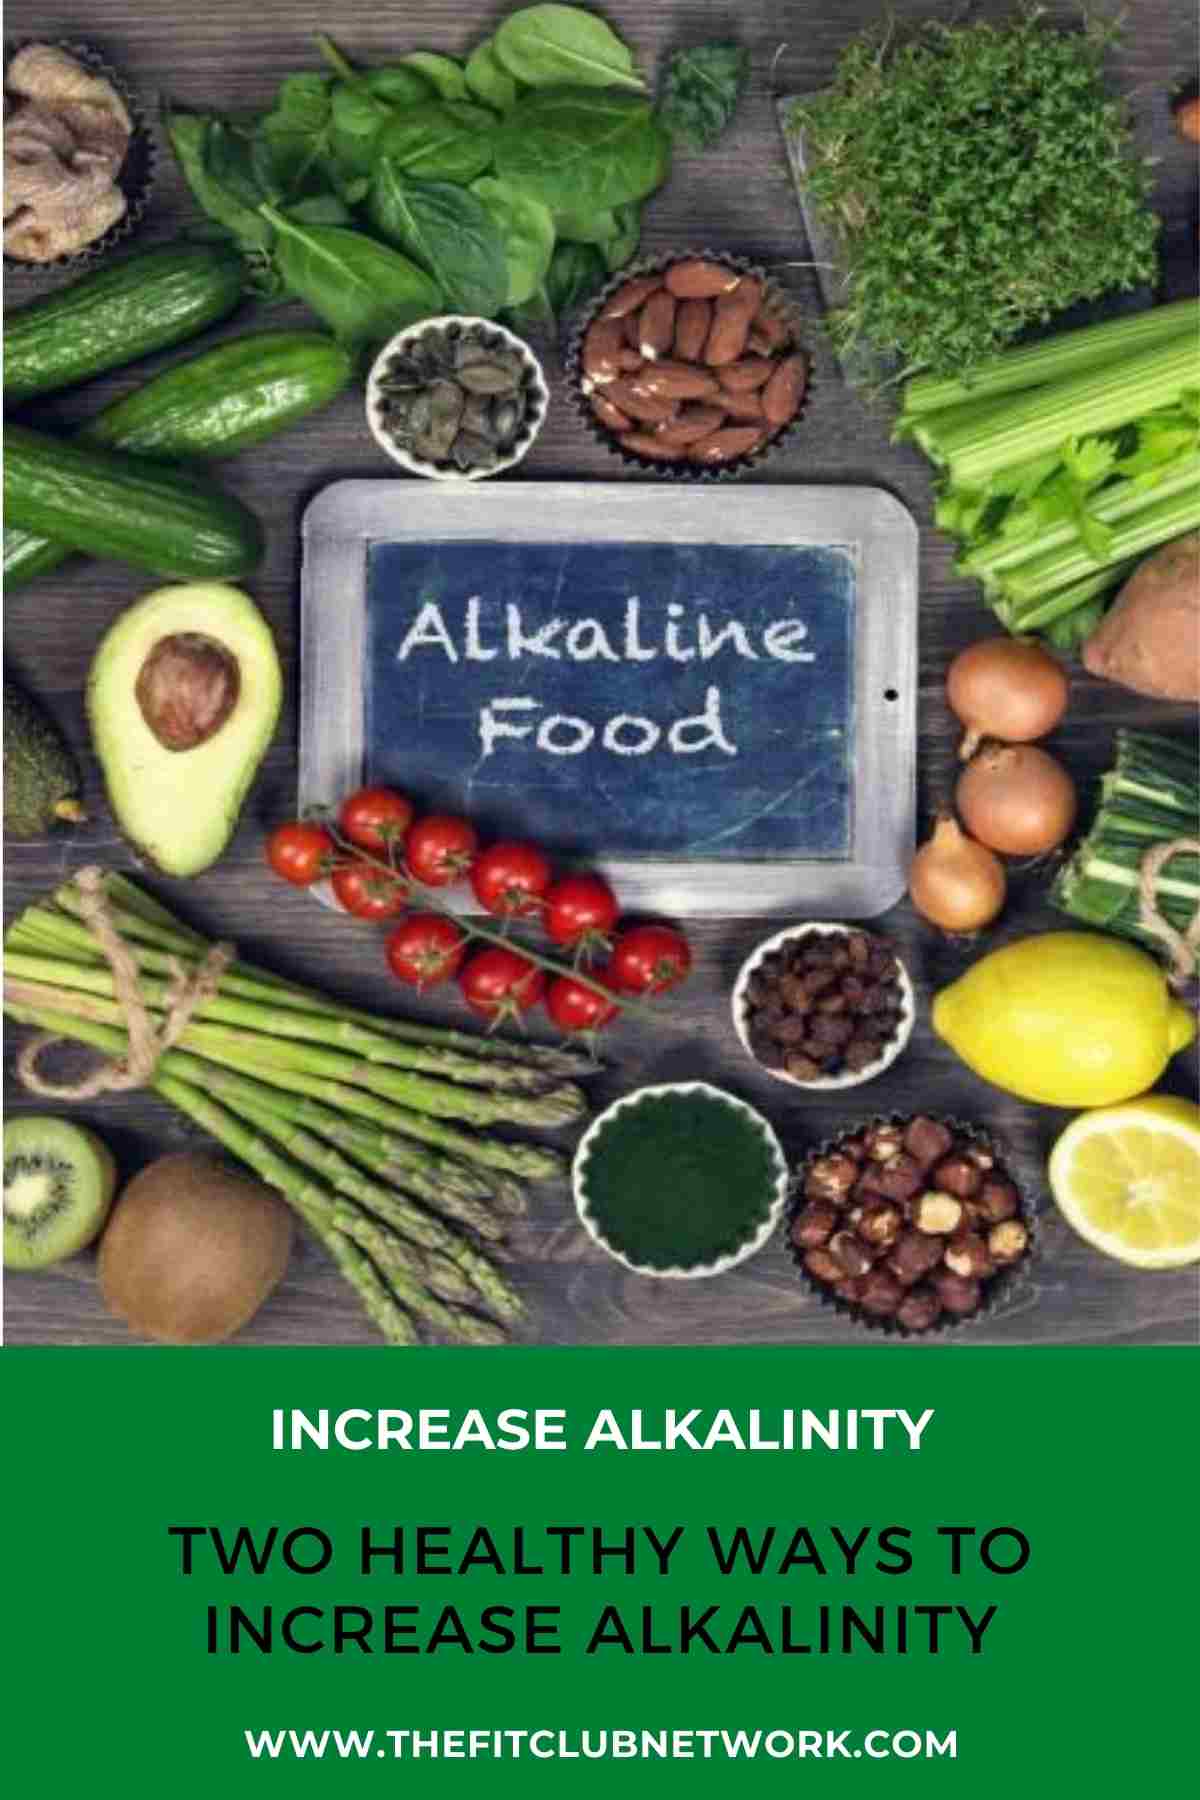 How to Increase Alkalinity | TheFitClubNetwork.com